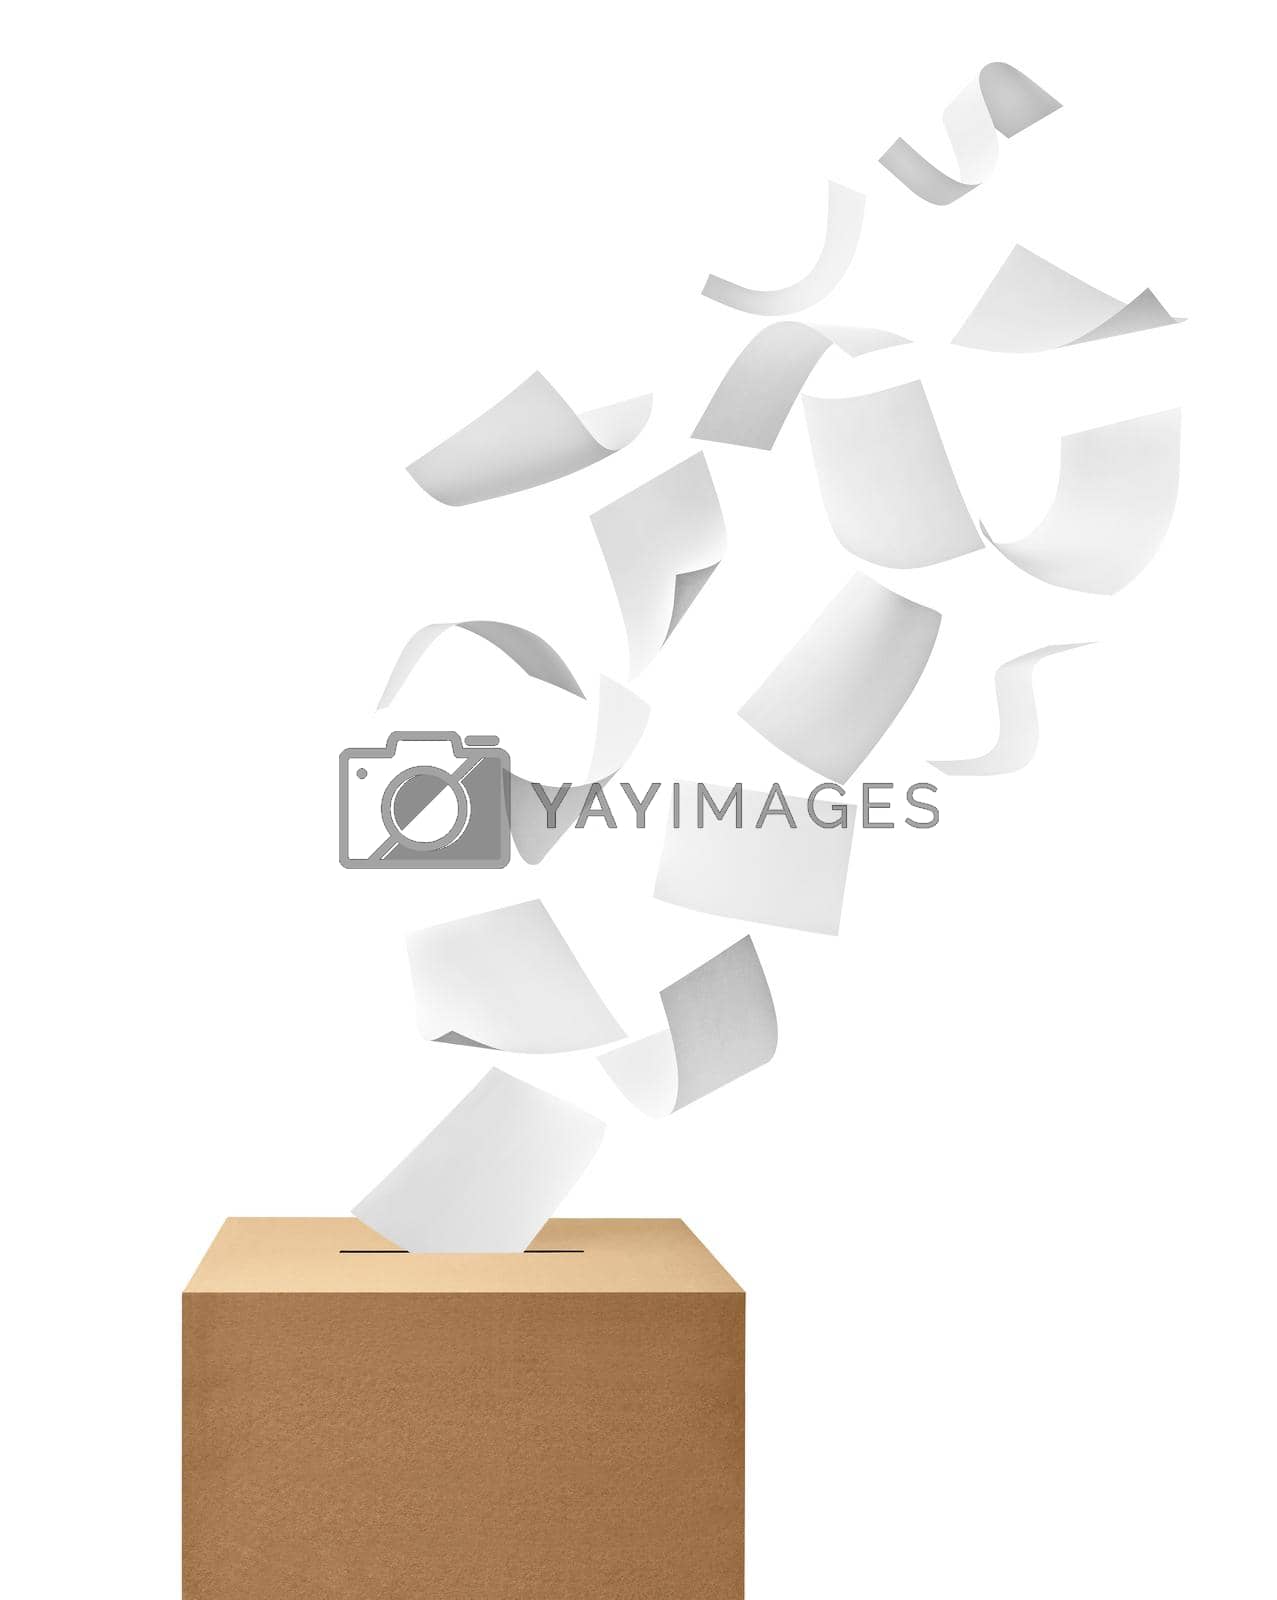 Royalty free image of ballot box casting vote election referendum politics elect woman female democracy hand voter flying air by Picsfive